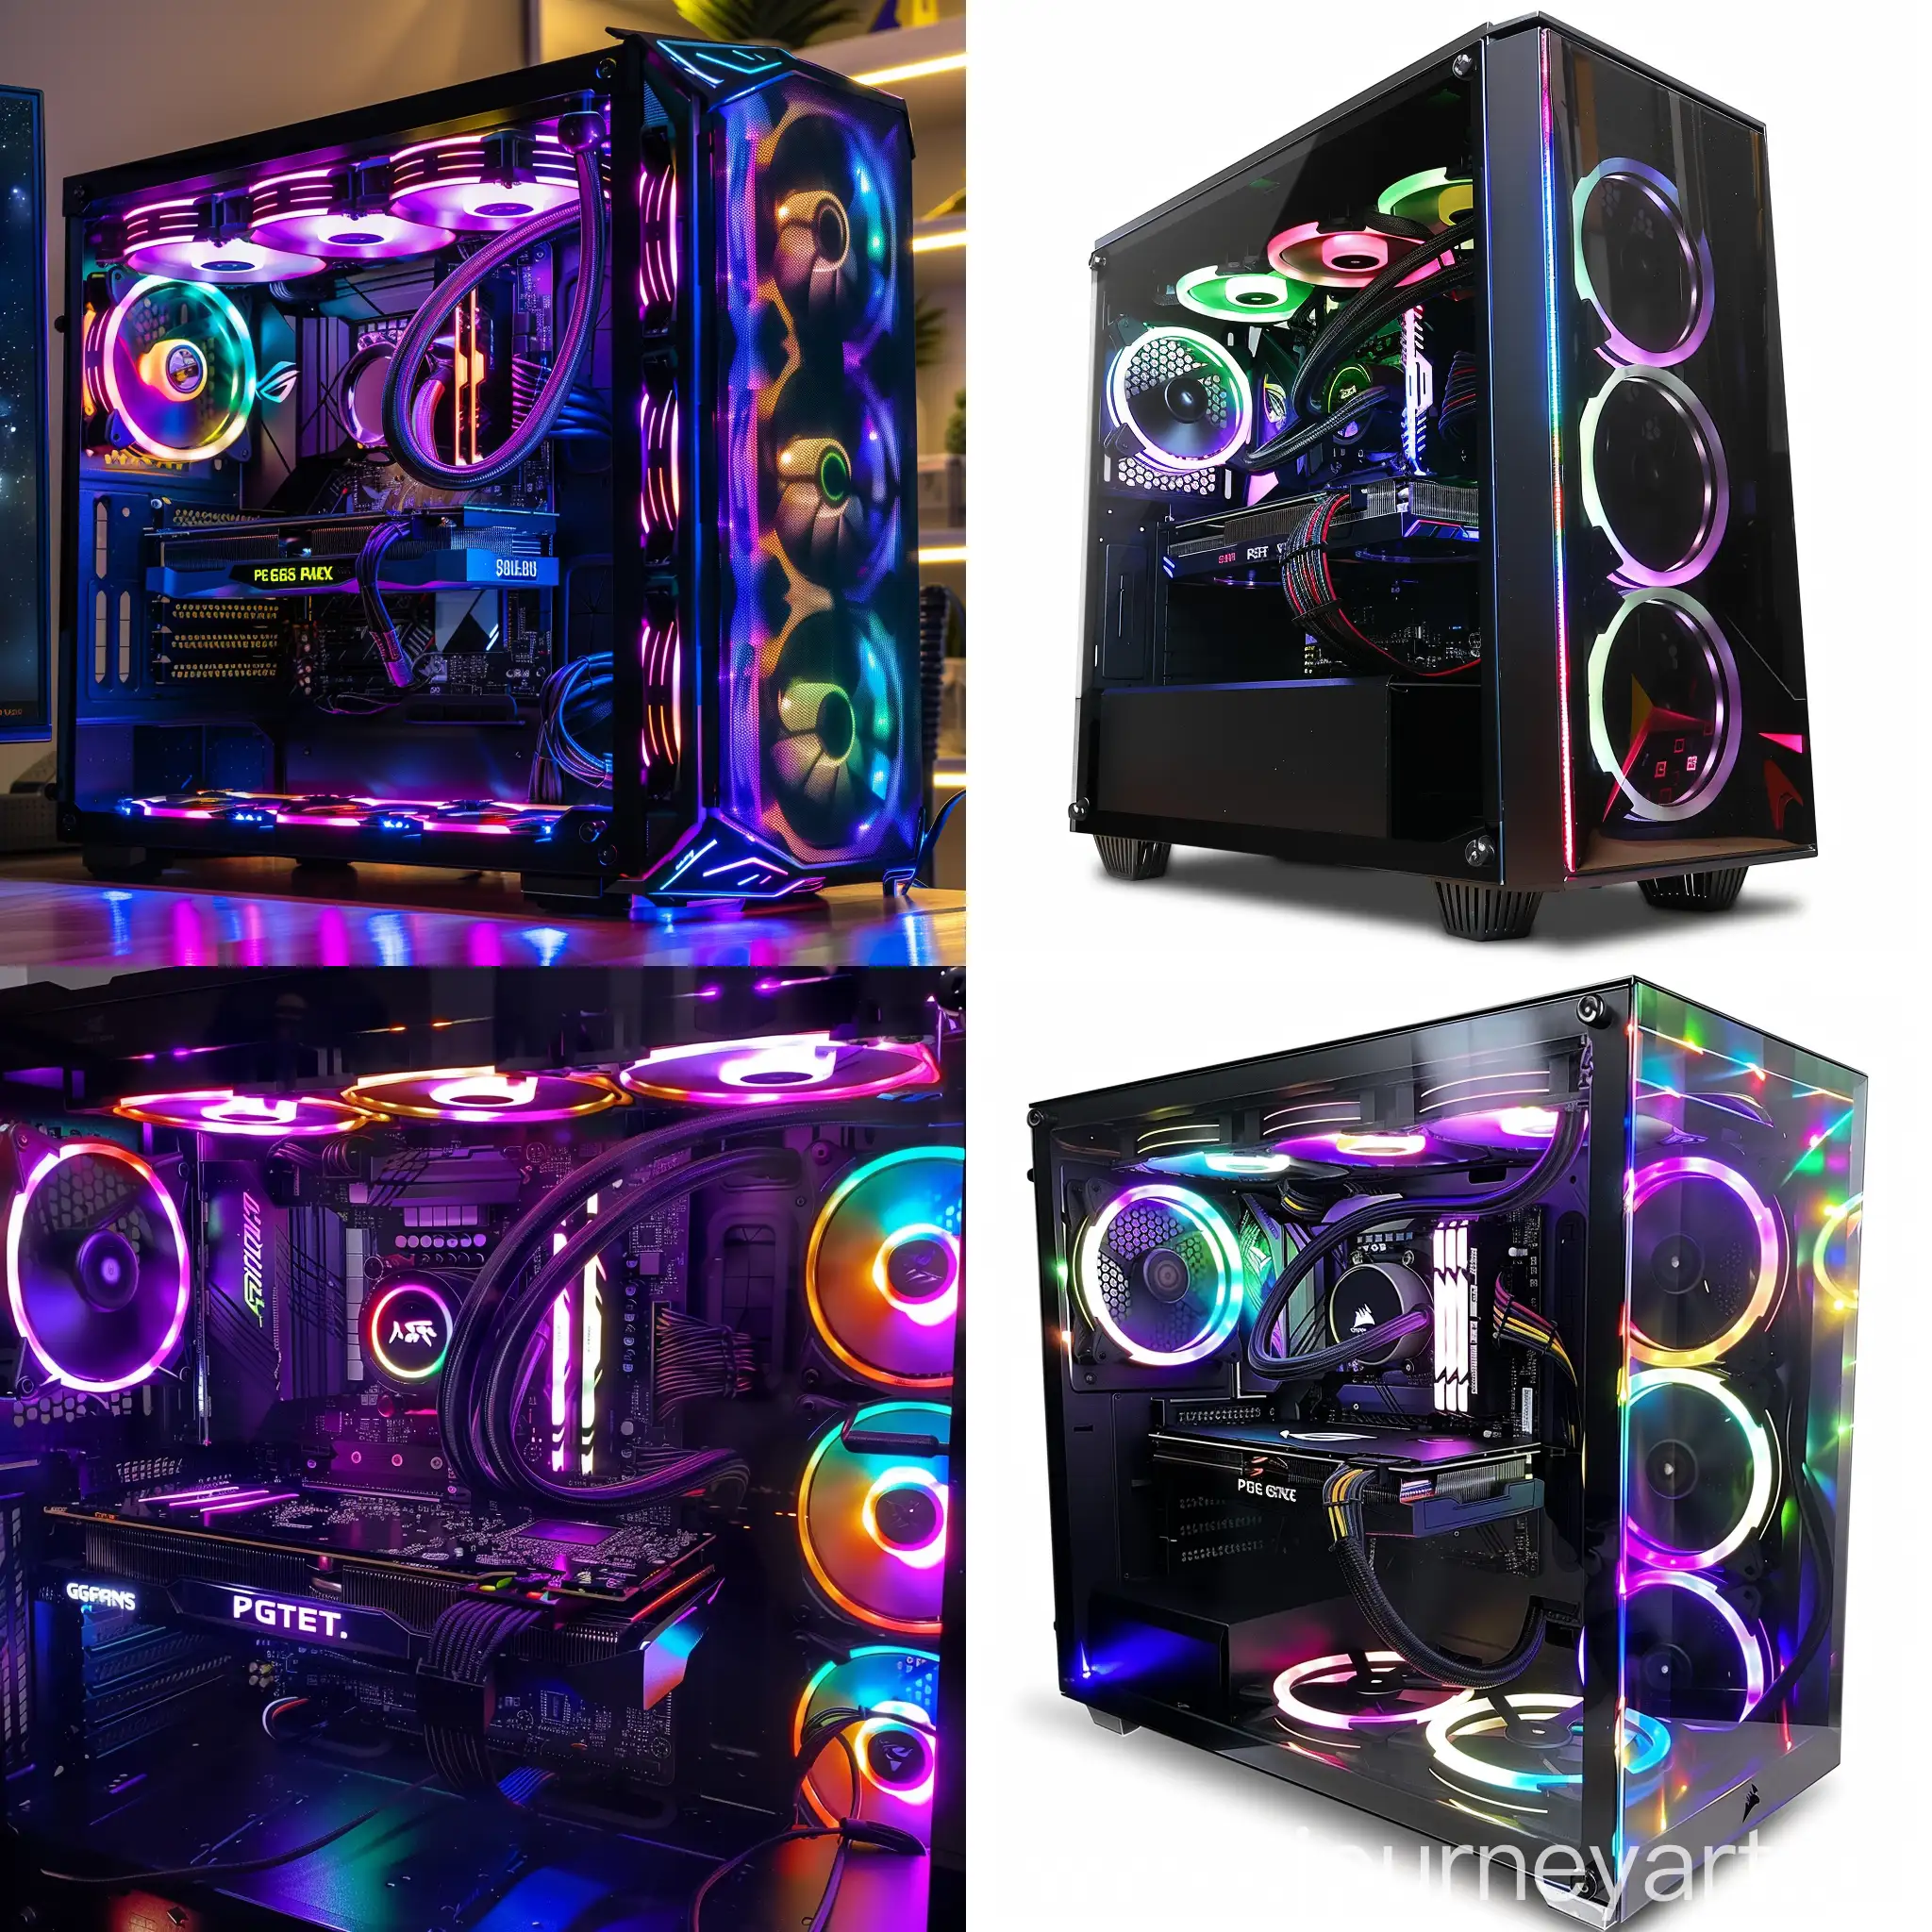 HighEnd-Gaming-PC-with-Dual-Graphics-Cards-Immersive-Photorealistic-Experience